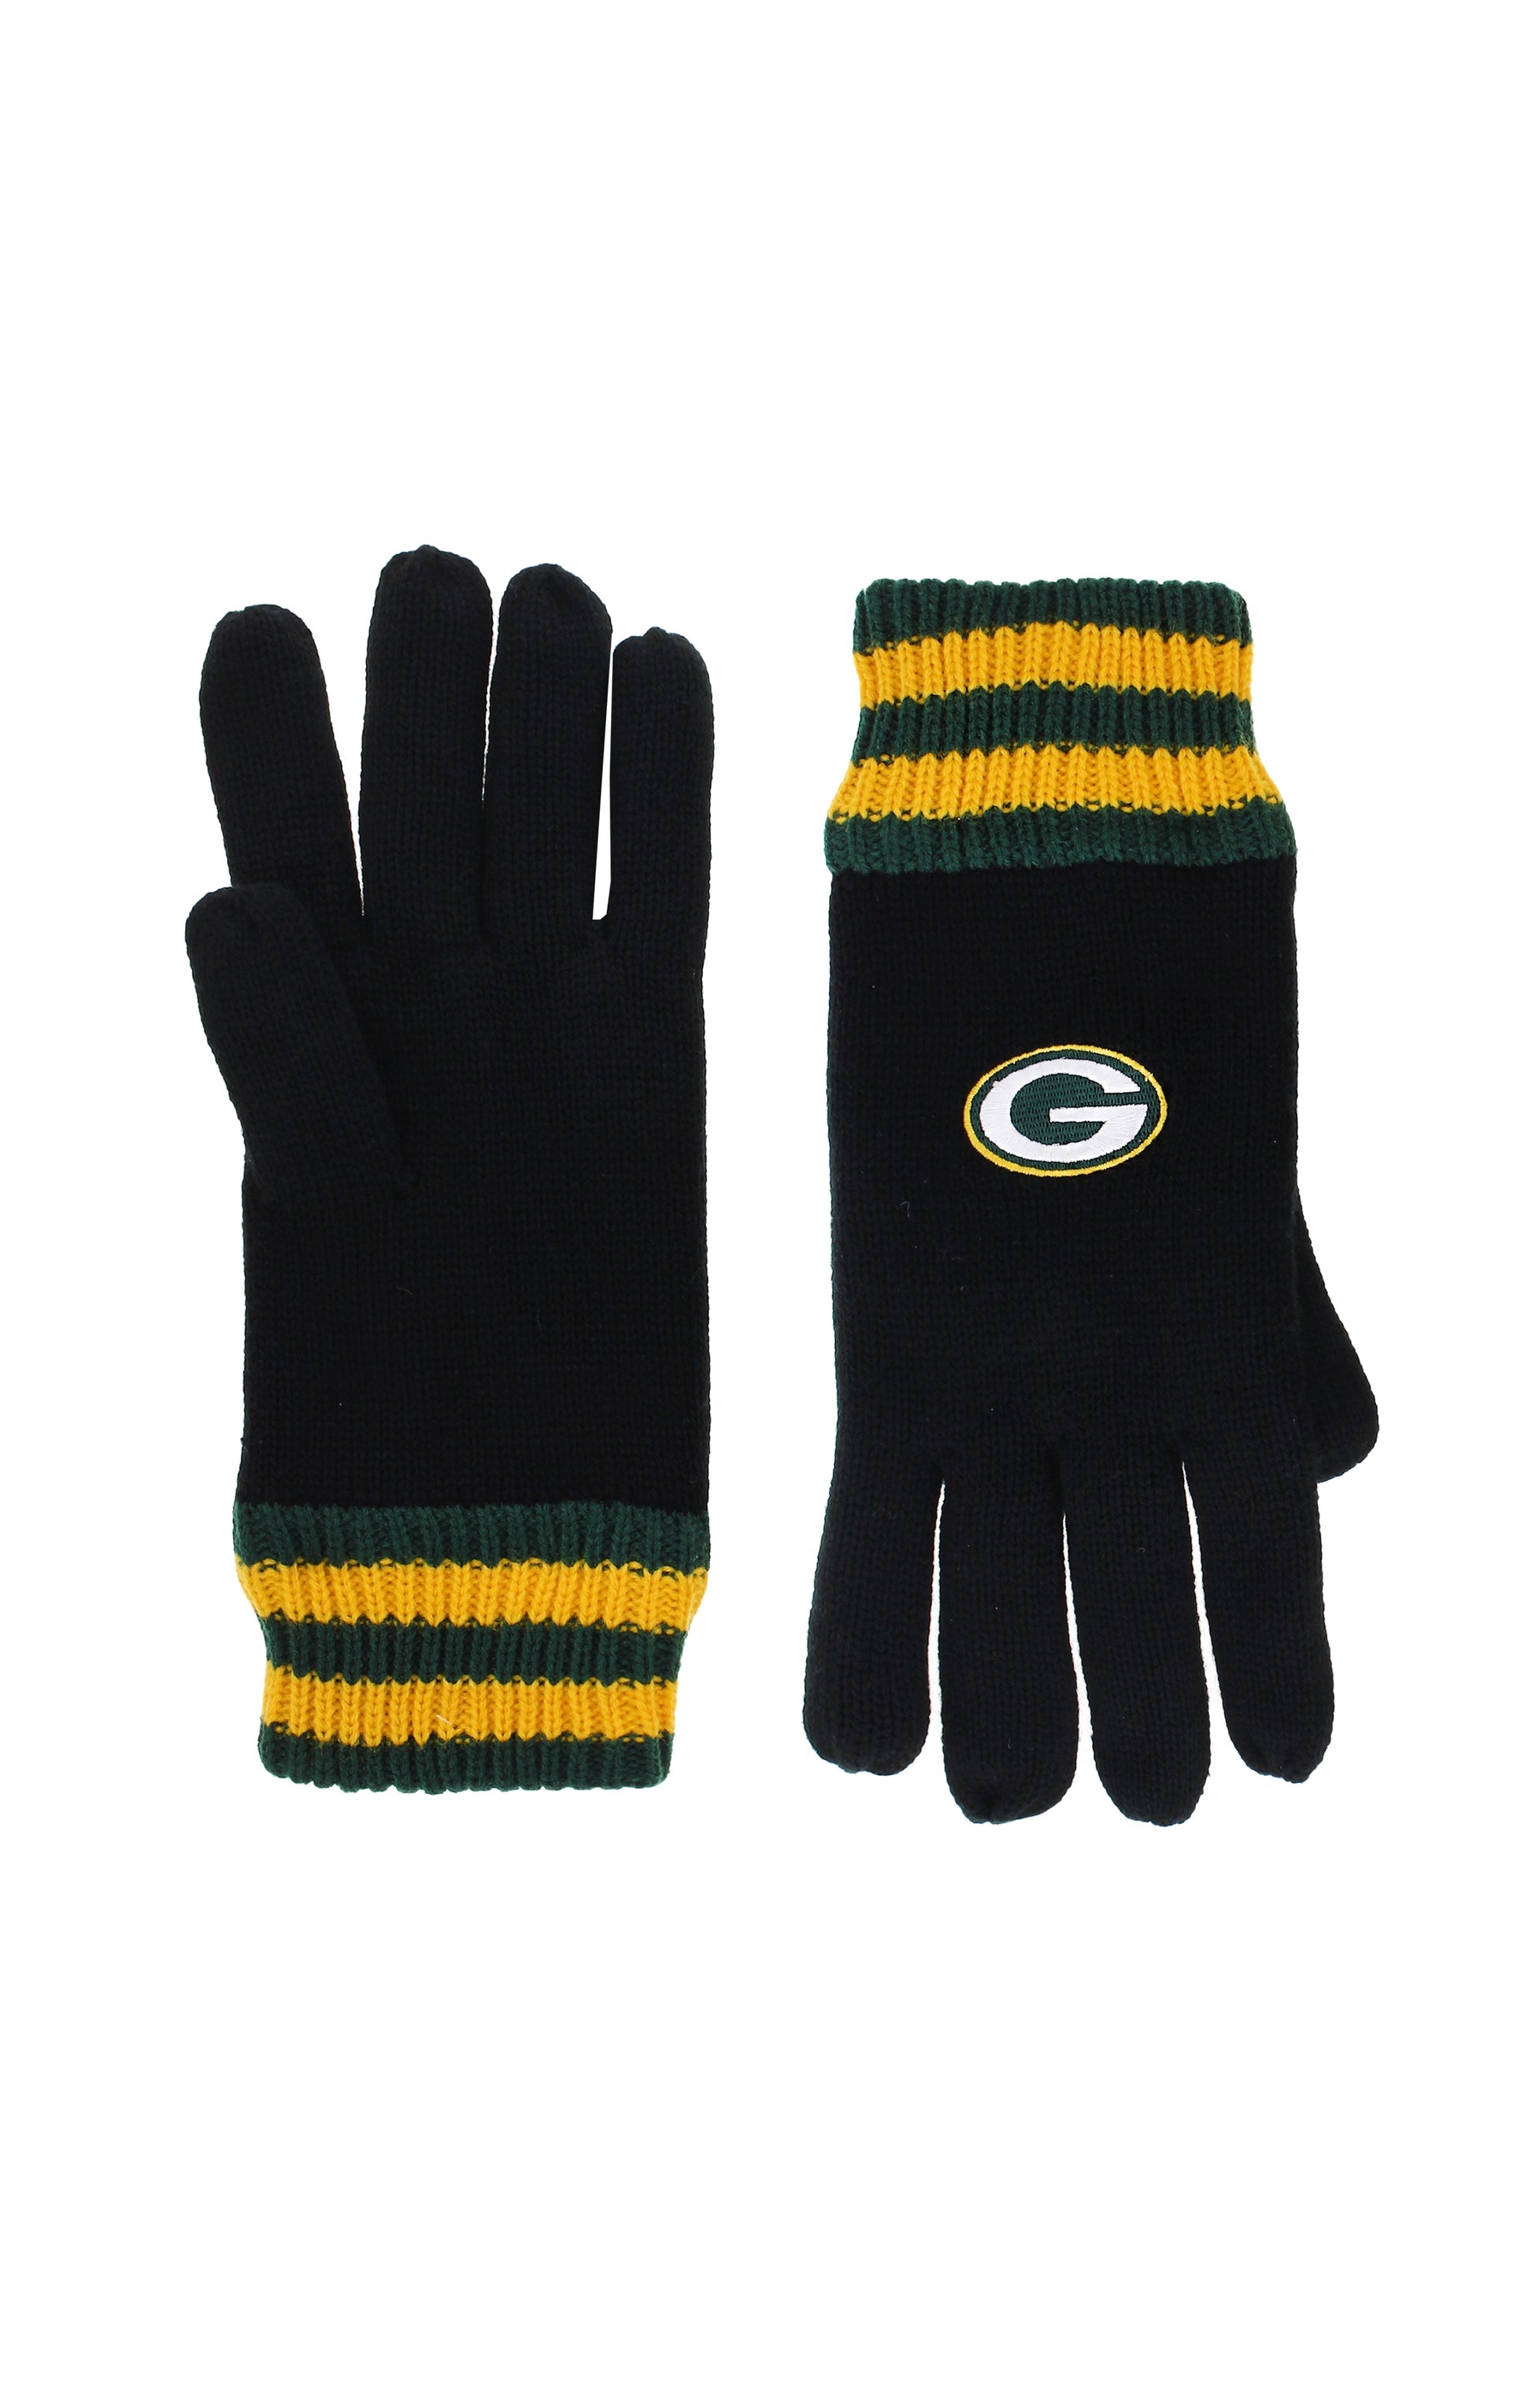 Gertex NFL Insulated Thermal Men's Adult Winter Gloves